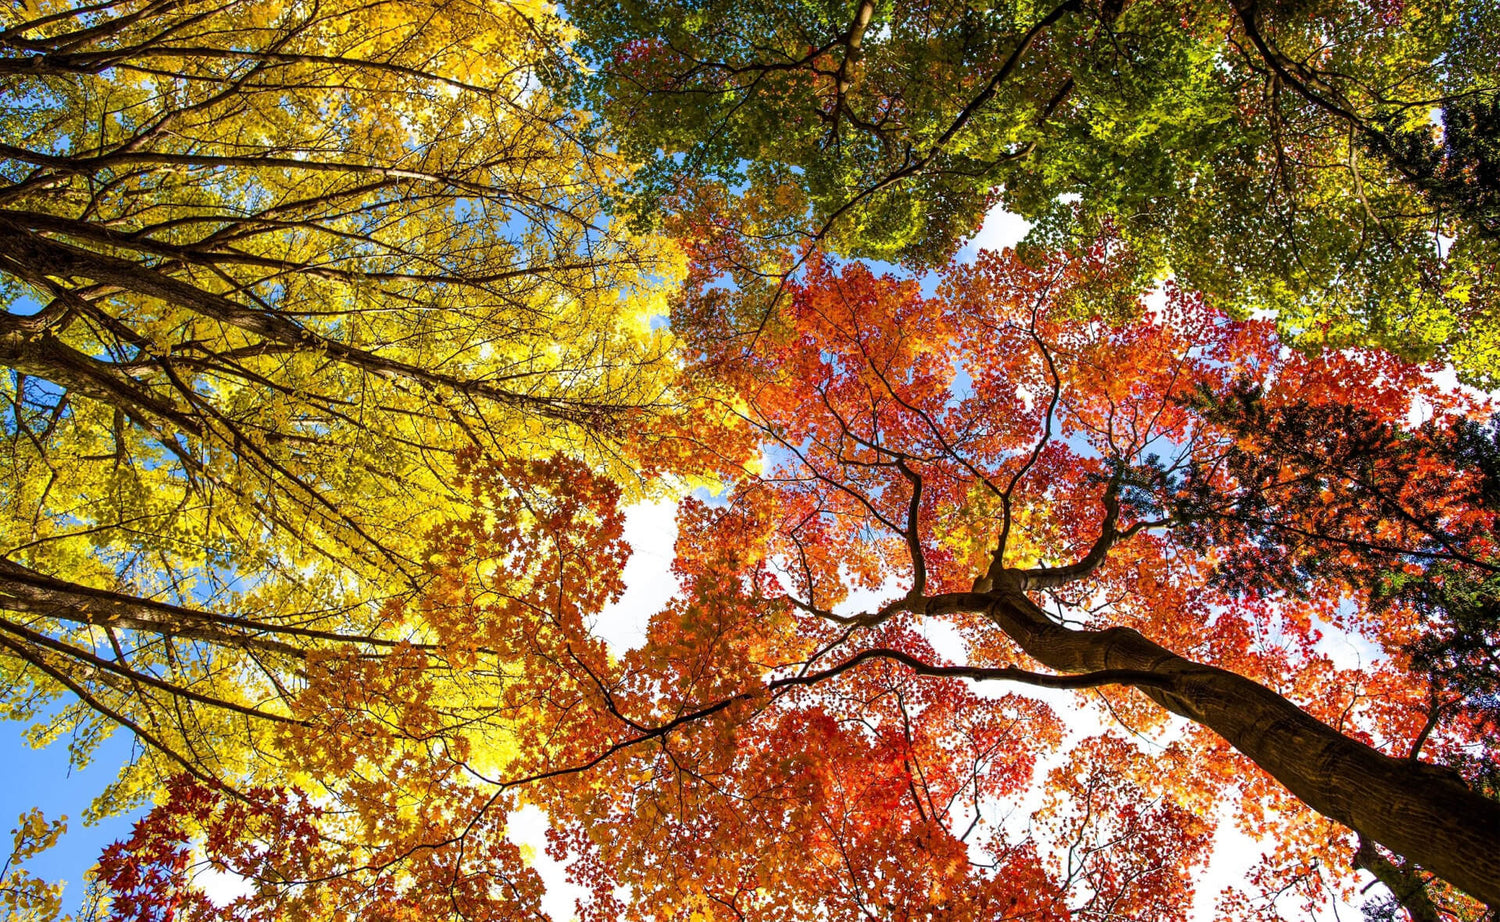 Nature's Canvas: A Guide to Captivating Autumn Foliage